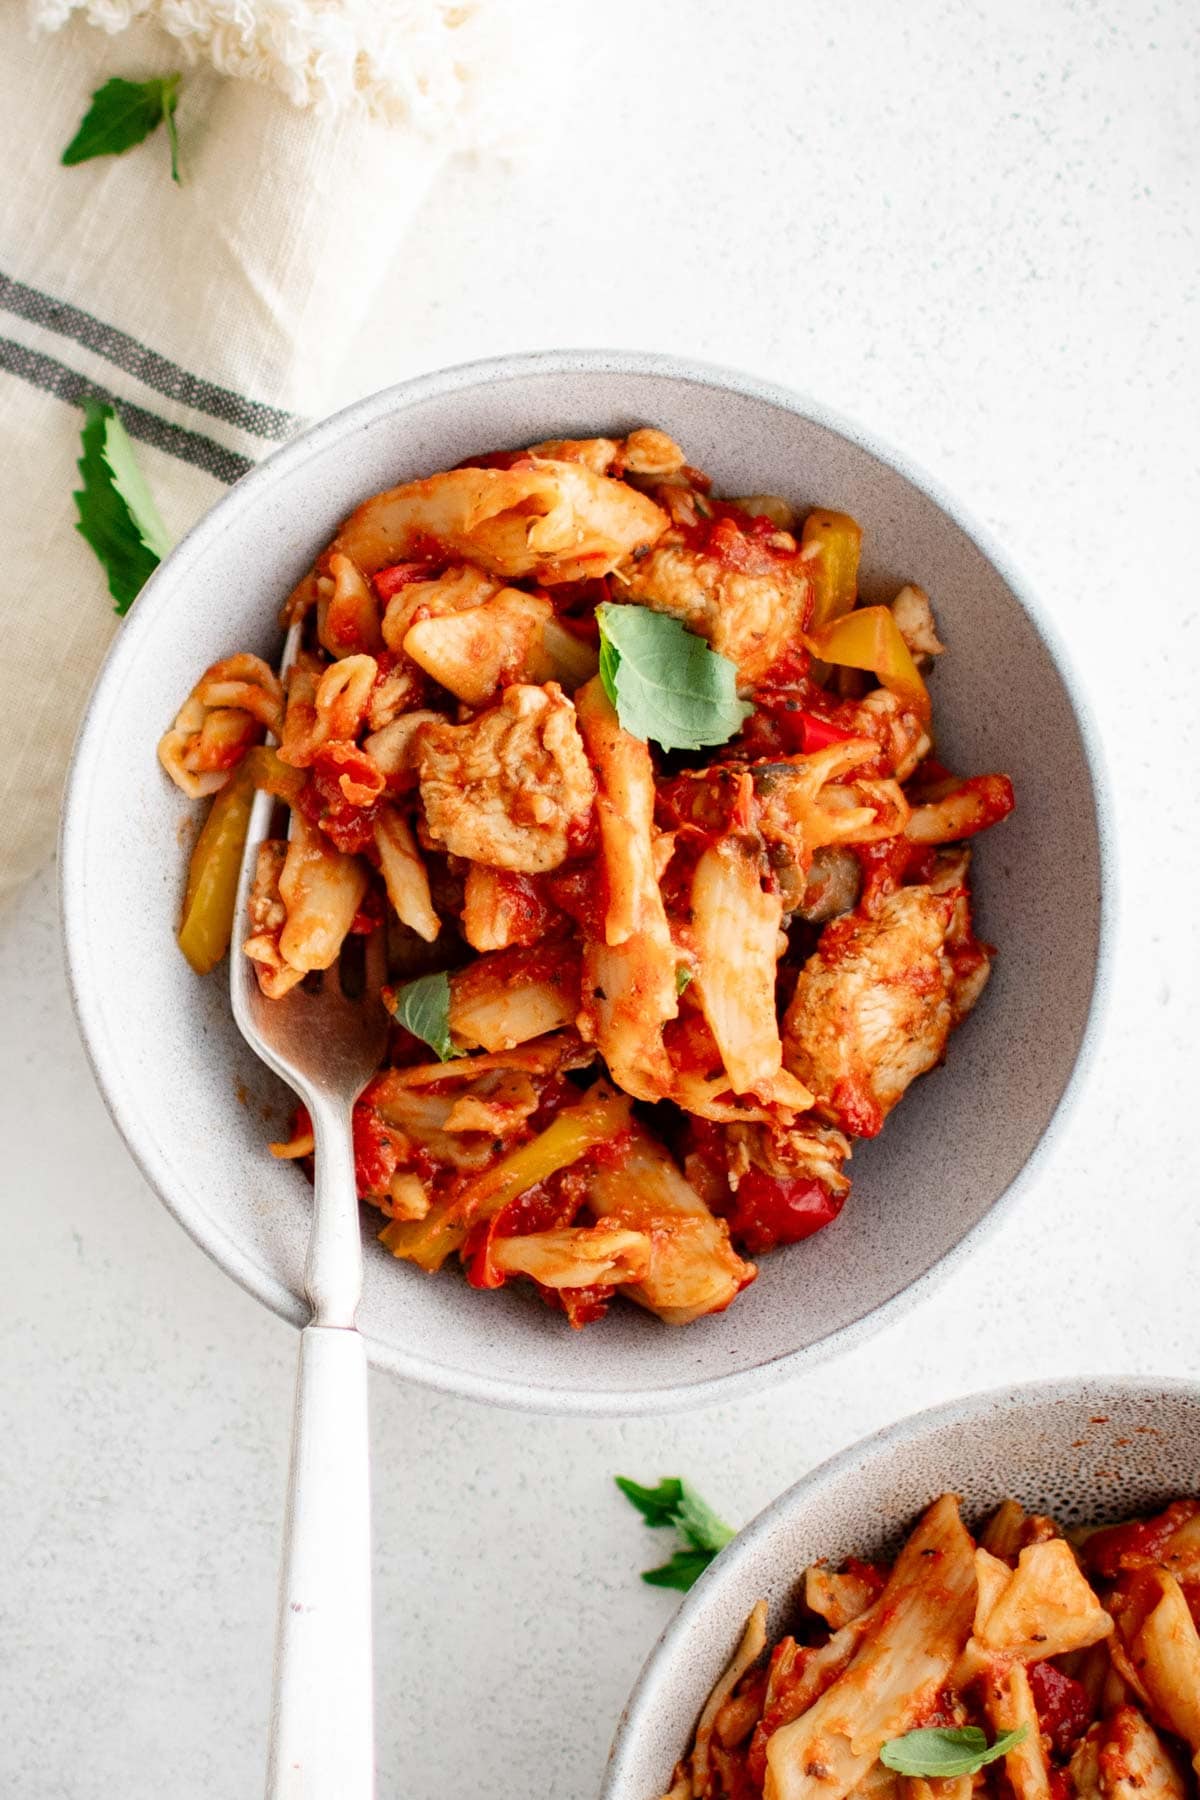 Bowl with chicken, pasta and red sauce and a fork.